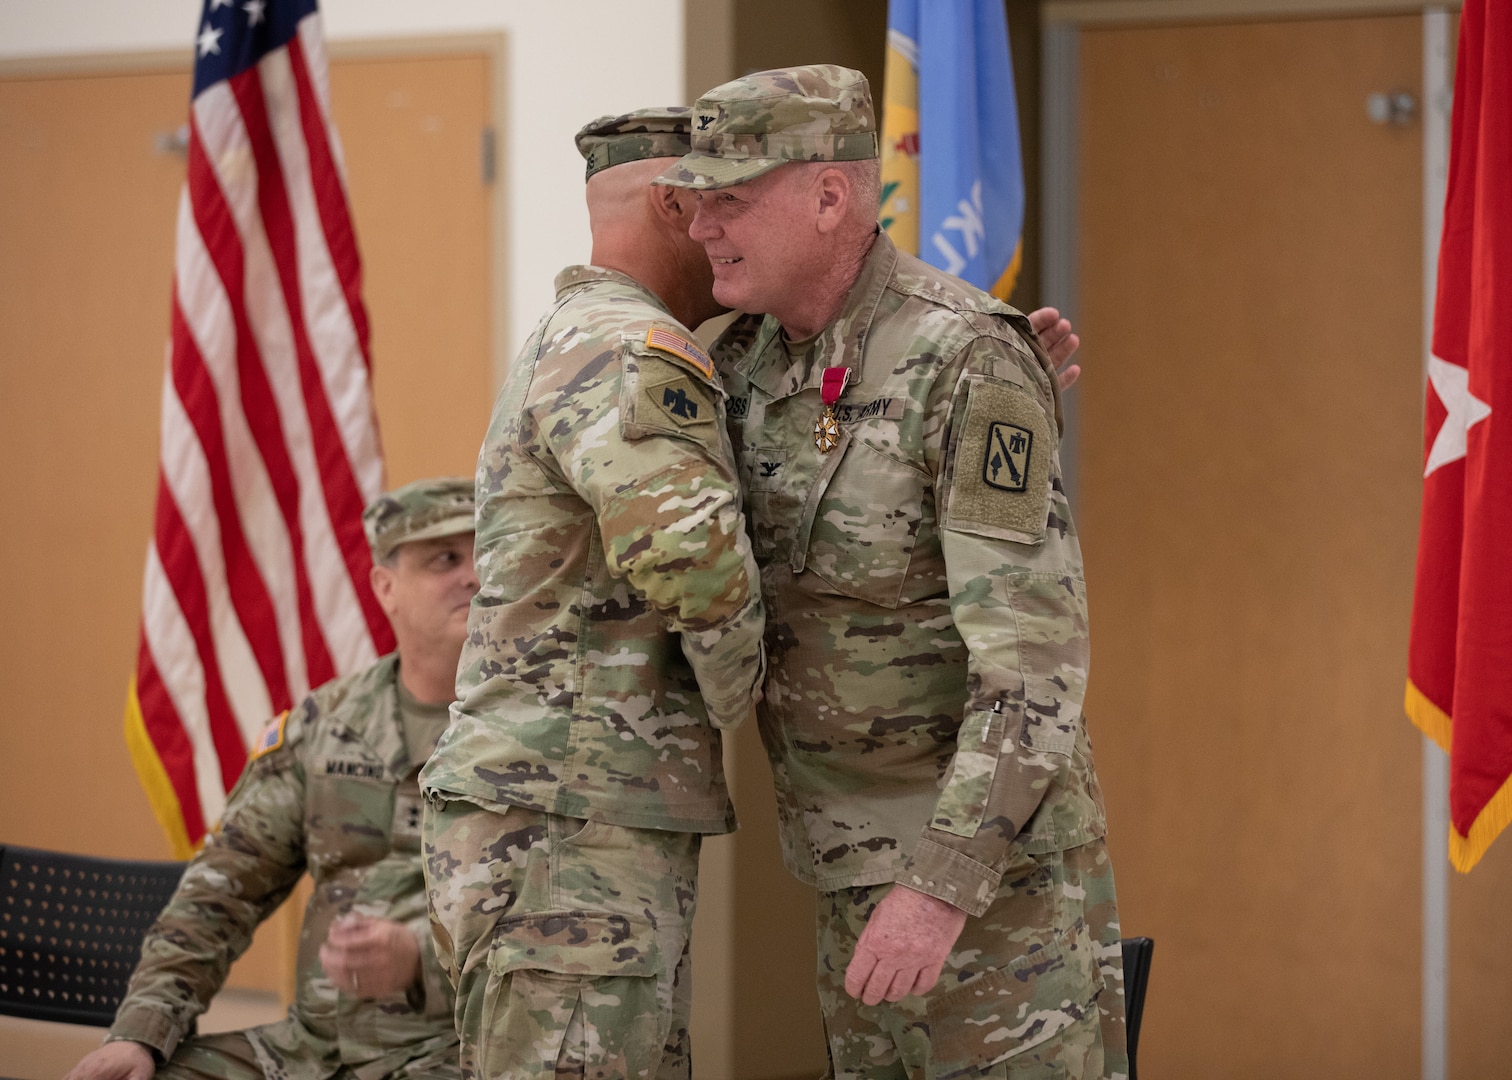 Col. Johnnie Dale Moss, outgoing commander of the 45th Field Artillery Brigade, Oklahoma Army National Guard hugs incoming commander Lt. Col. William Kale Rogers during a change of command ceremony held at the Mustang Armed Forces Reserve Center in Mustang, Oklahoma, on June 15, 2024. The changing of command signifies the transfer of responsibility from outgoing to incoming commander. (Oklahoma National Guard photo by Pfc. Brooklyn Clark)